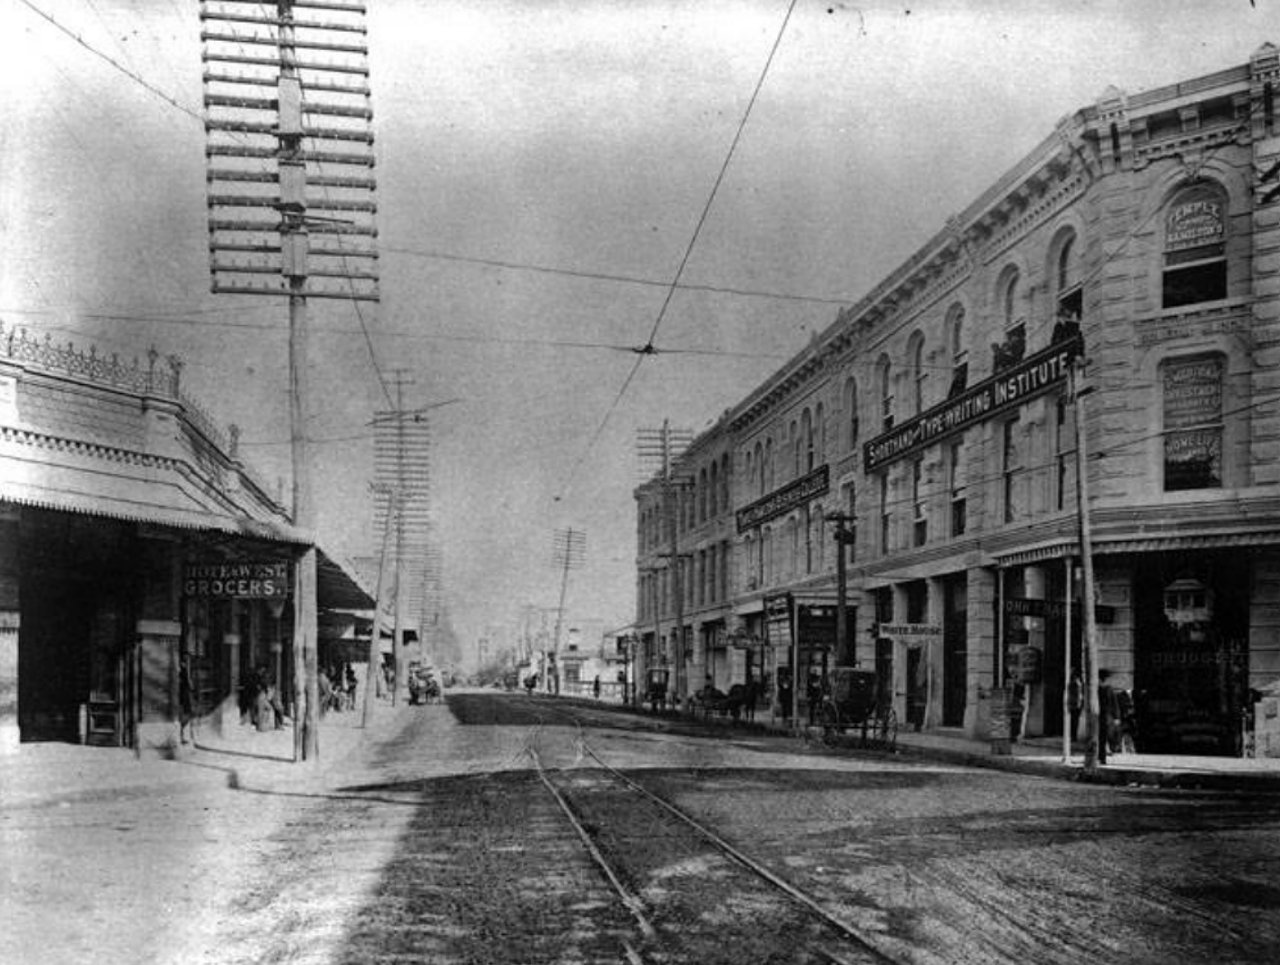 Back in the 1890s, West Houston Street housed the Rote and West Grocers, which can be seen on the left. Across the street was the three-story Soledad Block.